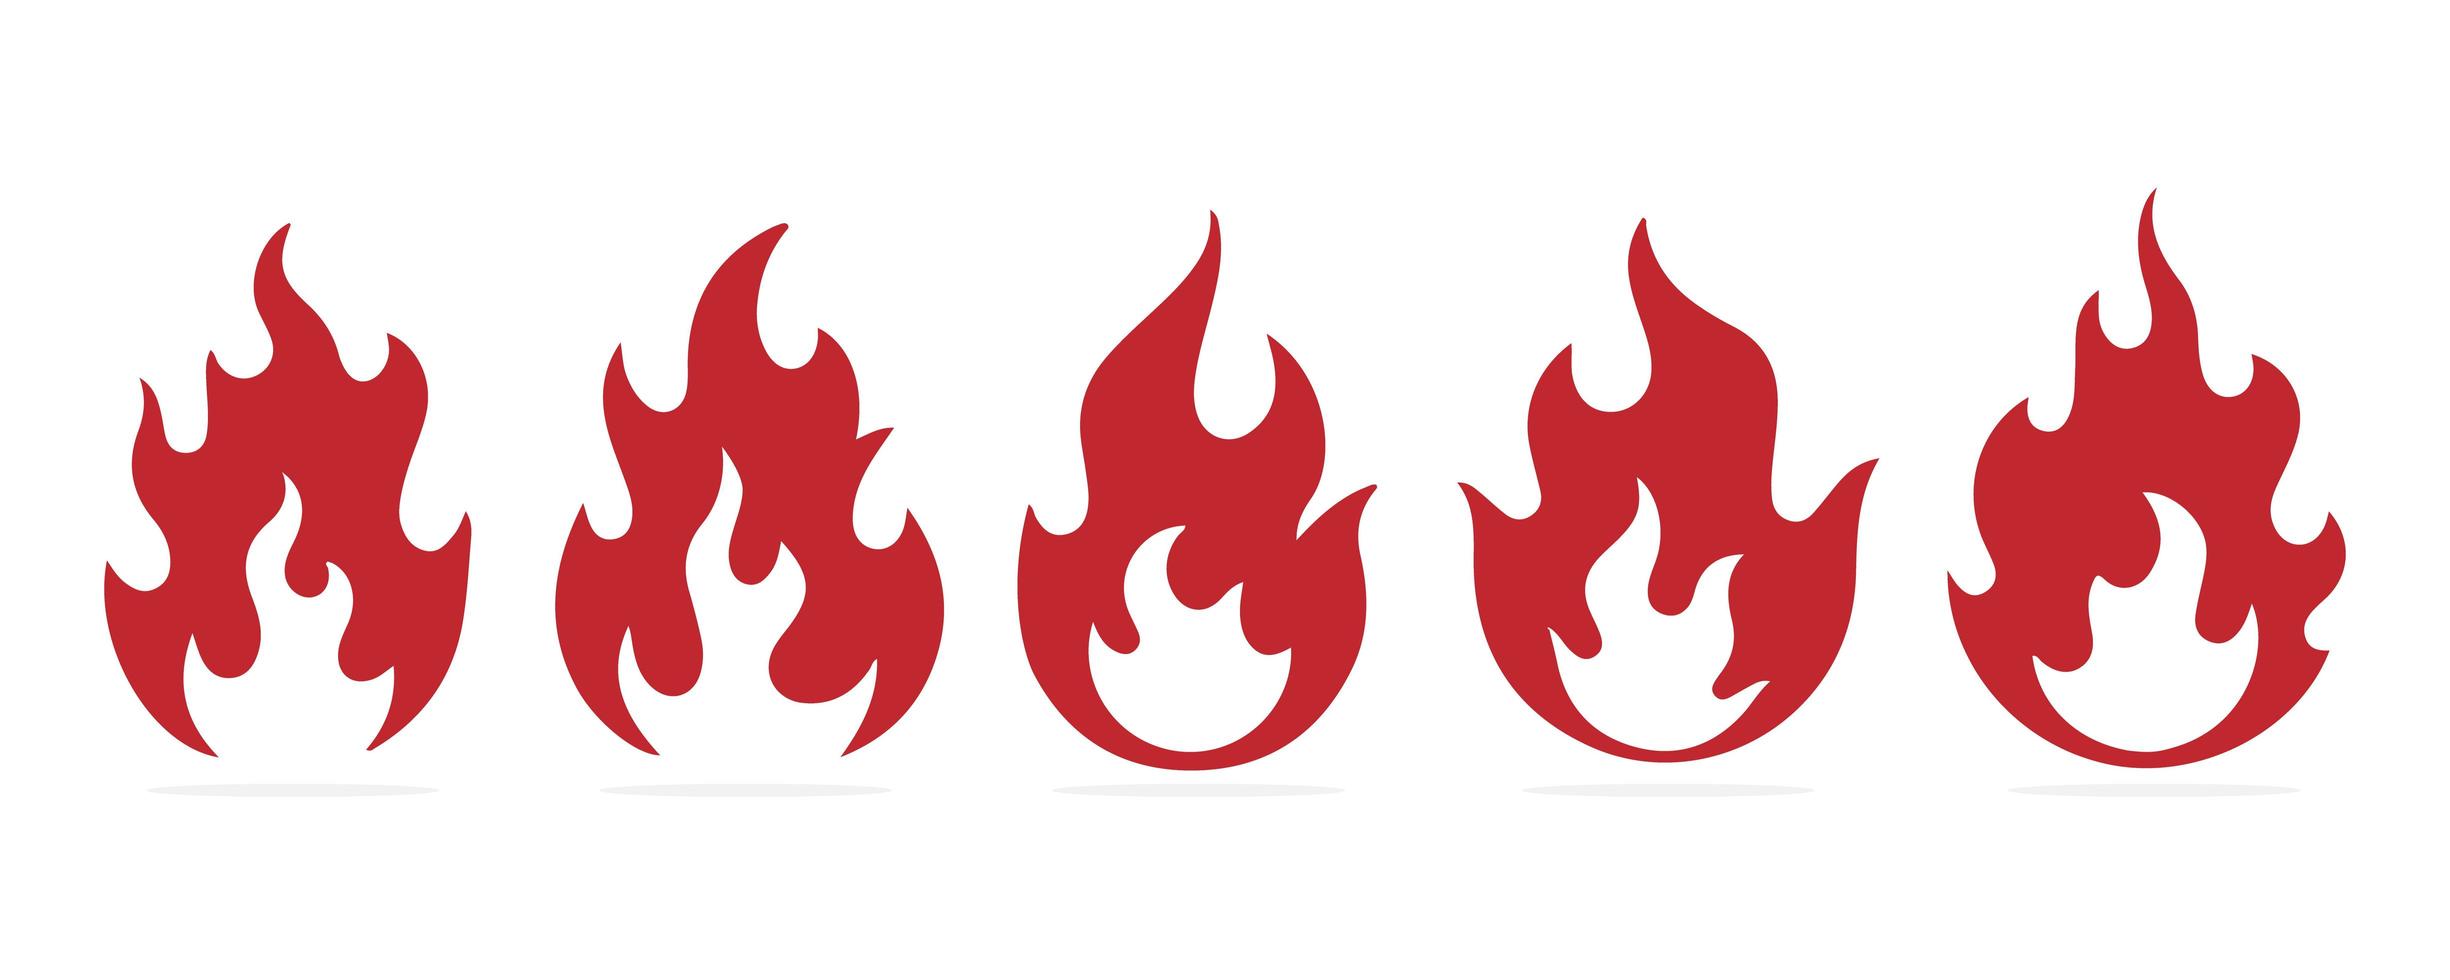 Flames icons set vector